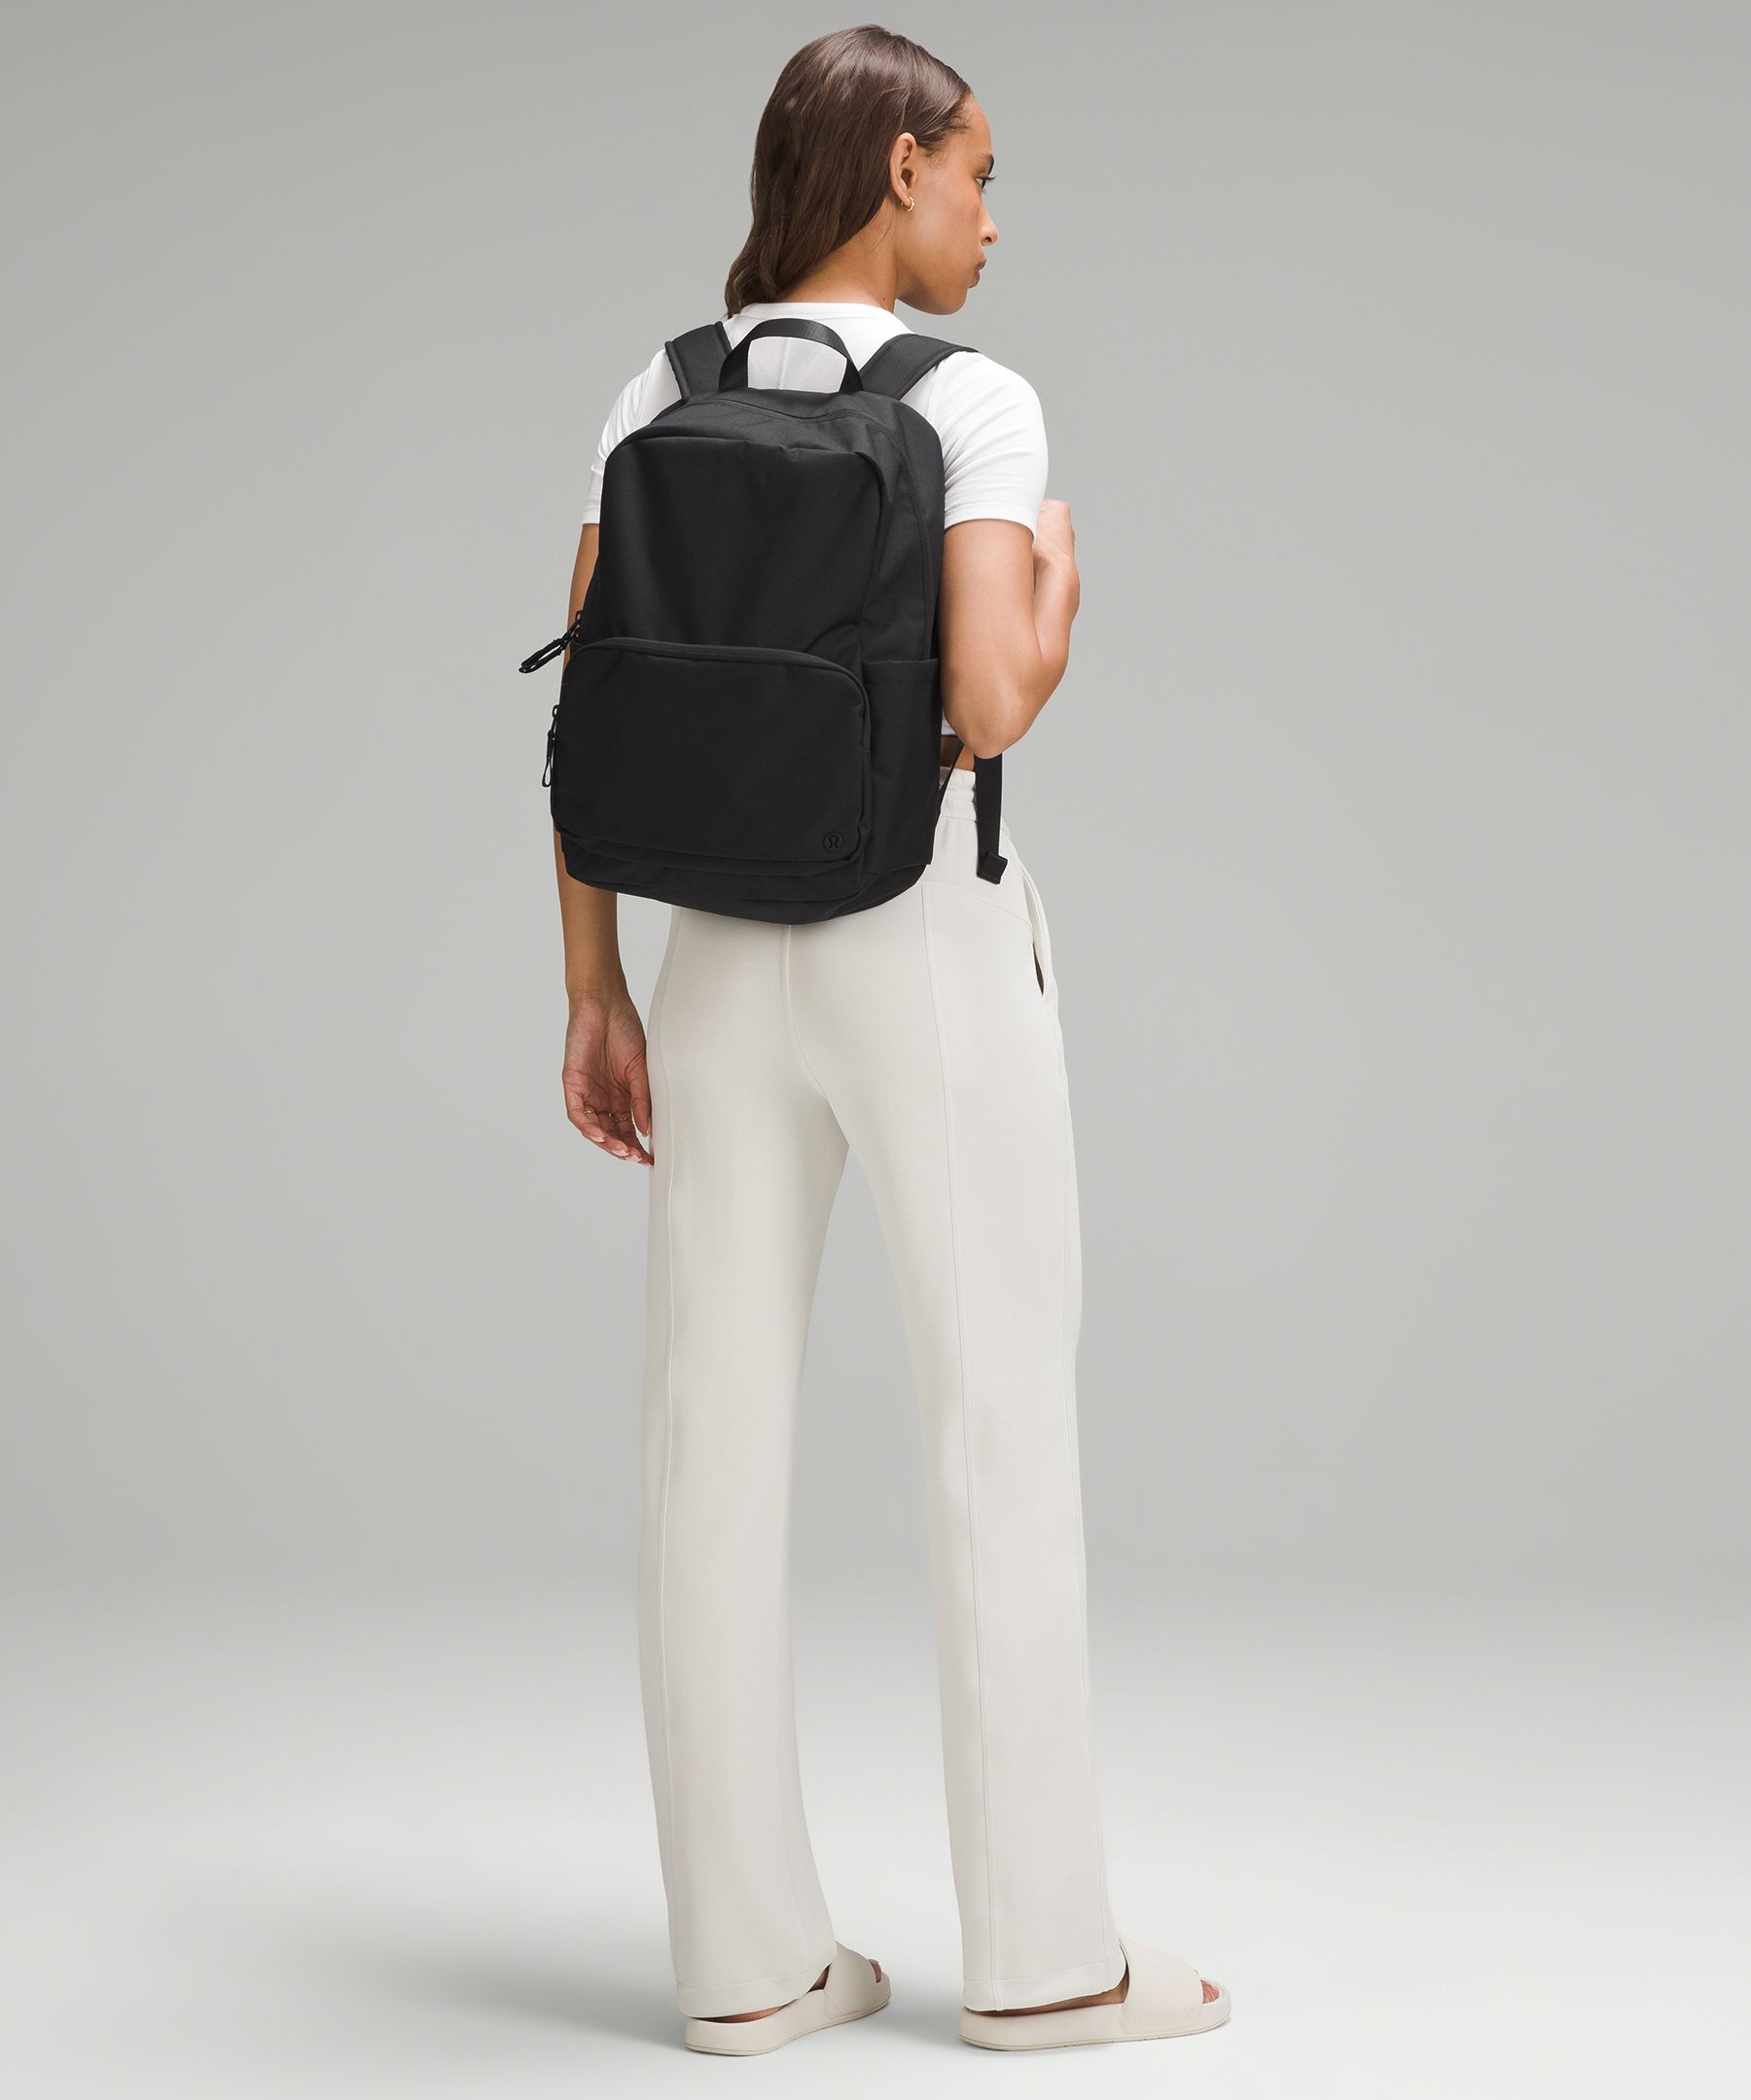 Shop Lululemon Backpack With Laptop Compartment - Everywhere 22l Tech Canvas